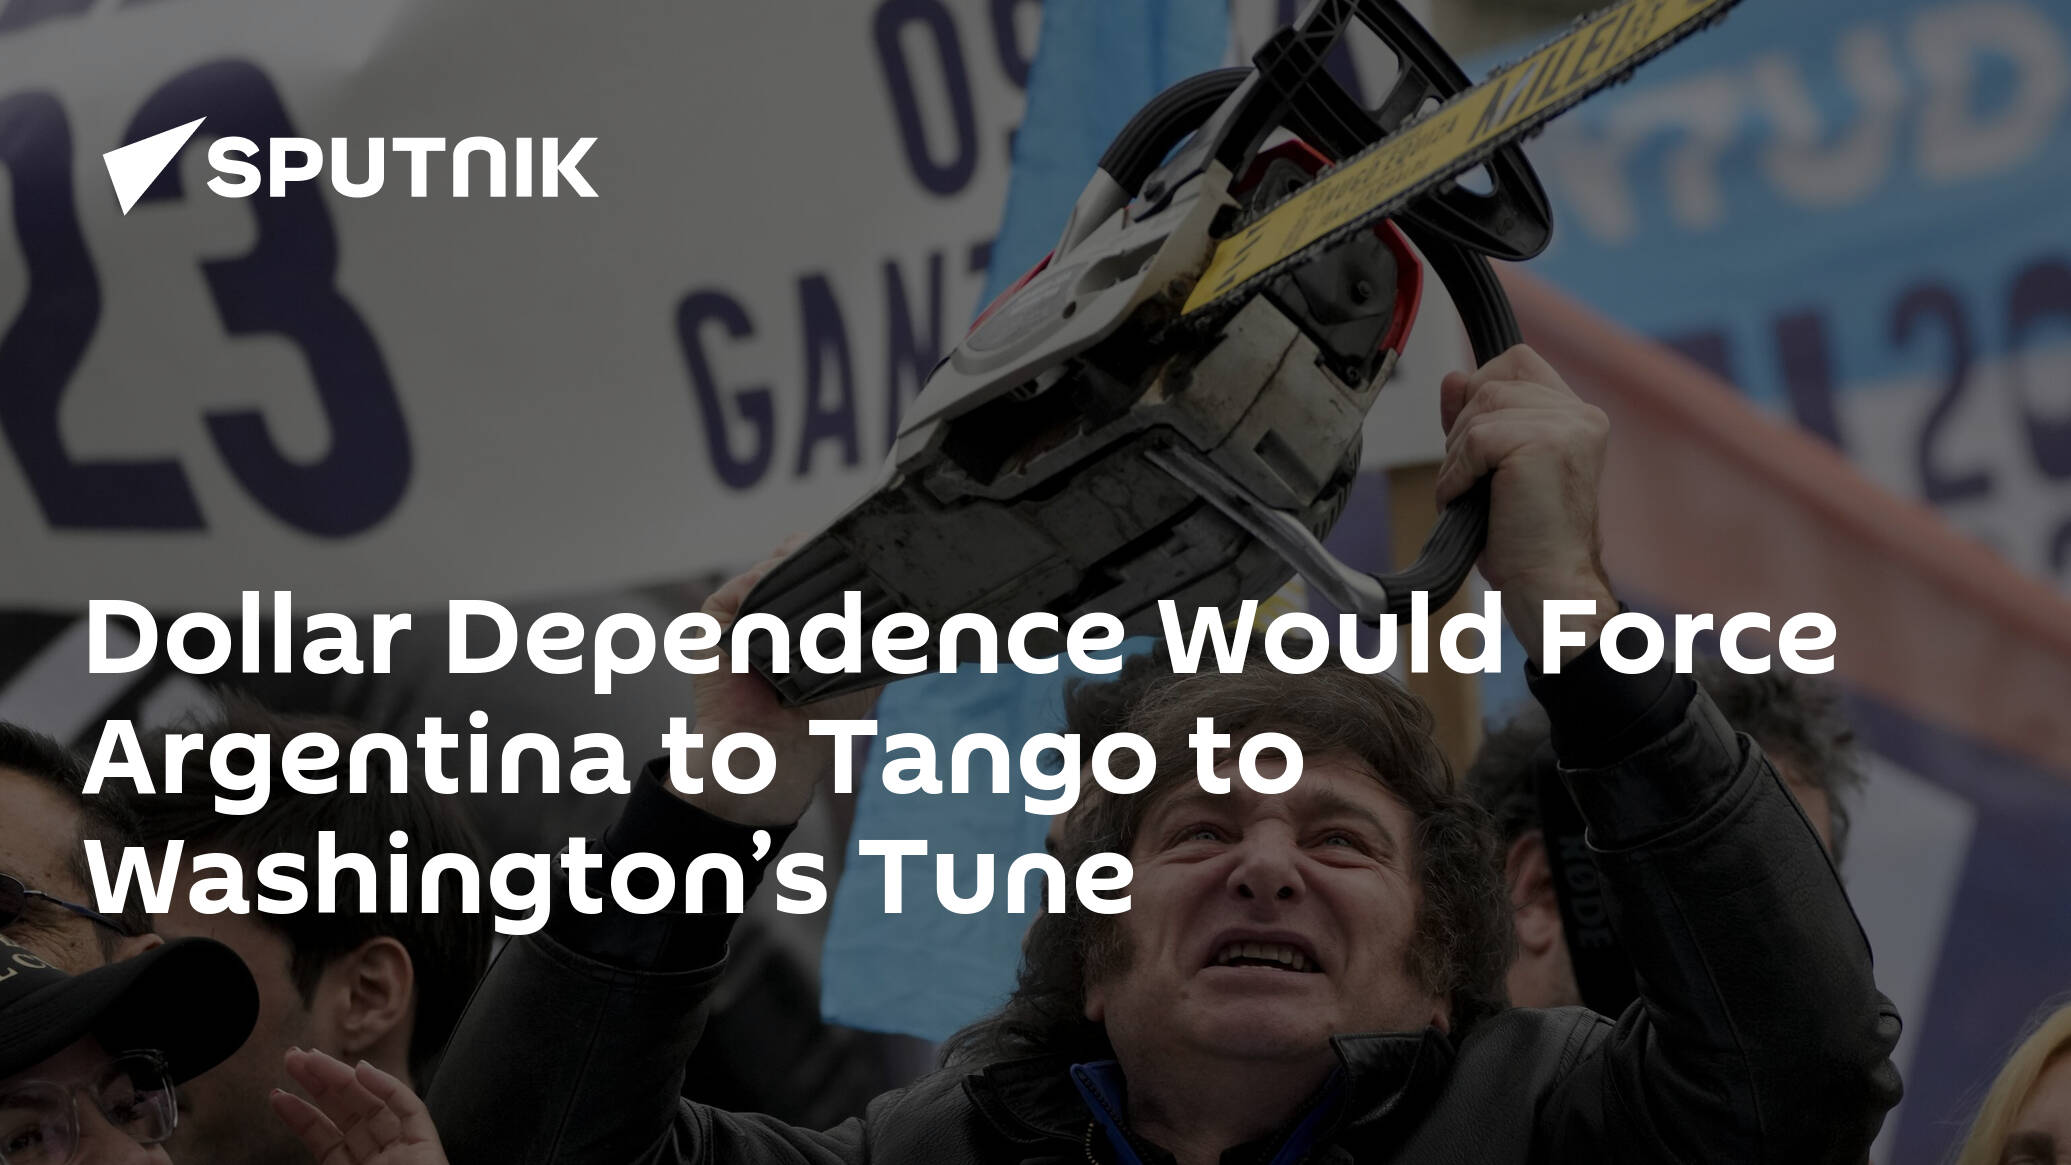 Dollar Dependence Would Force Argentina to Tango to Washington’s Tune